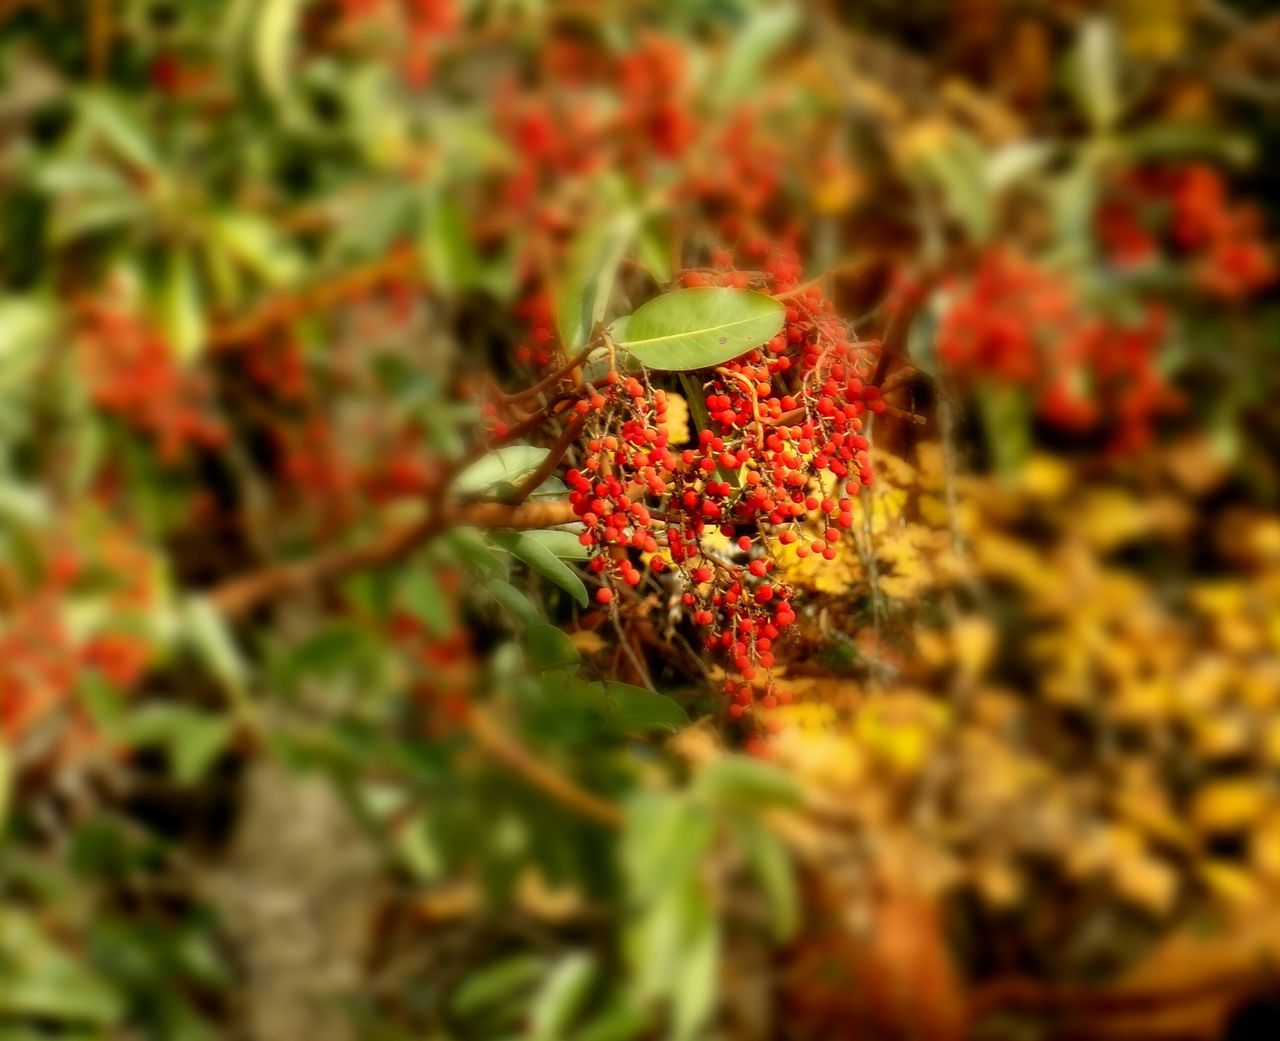 red, growth, flower, freshness, plant, beauty in nature, nature, close-up, focus on foreground, selective focus, fragility, field, day, outdoors, no people, leaf, petal, blooming, tranquility, season